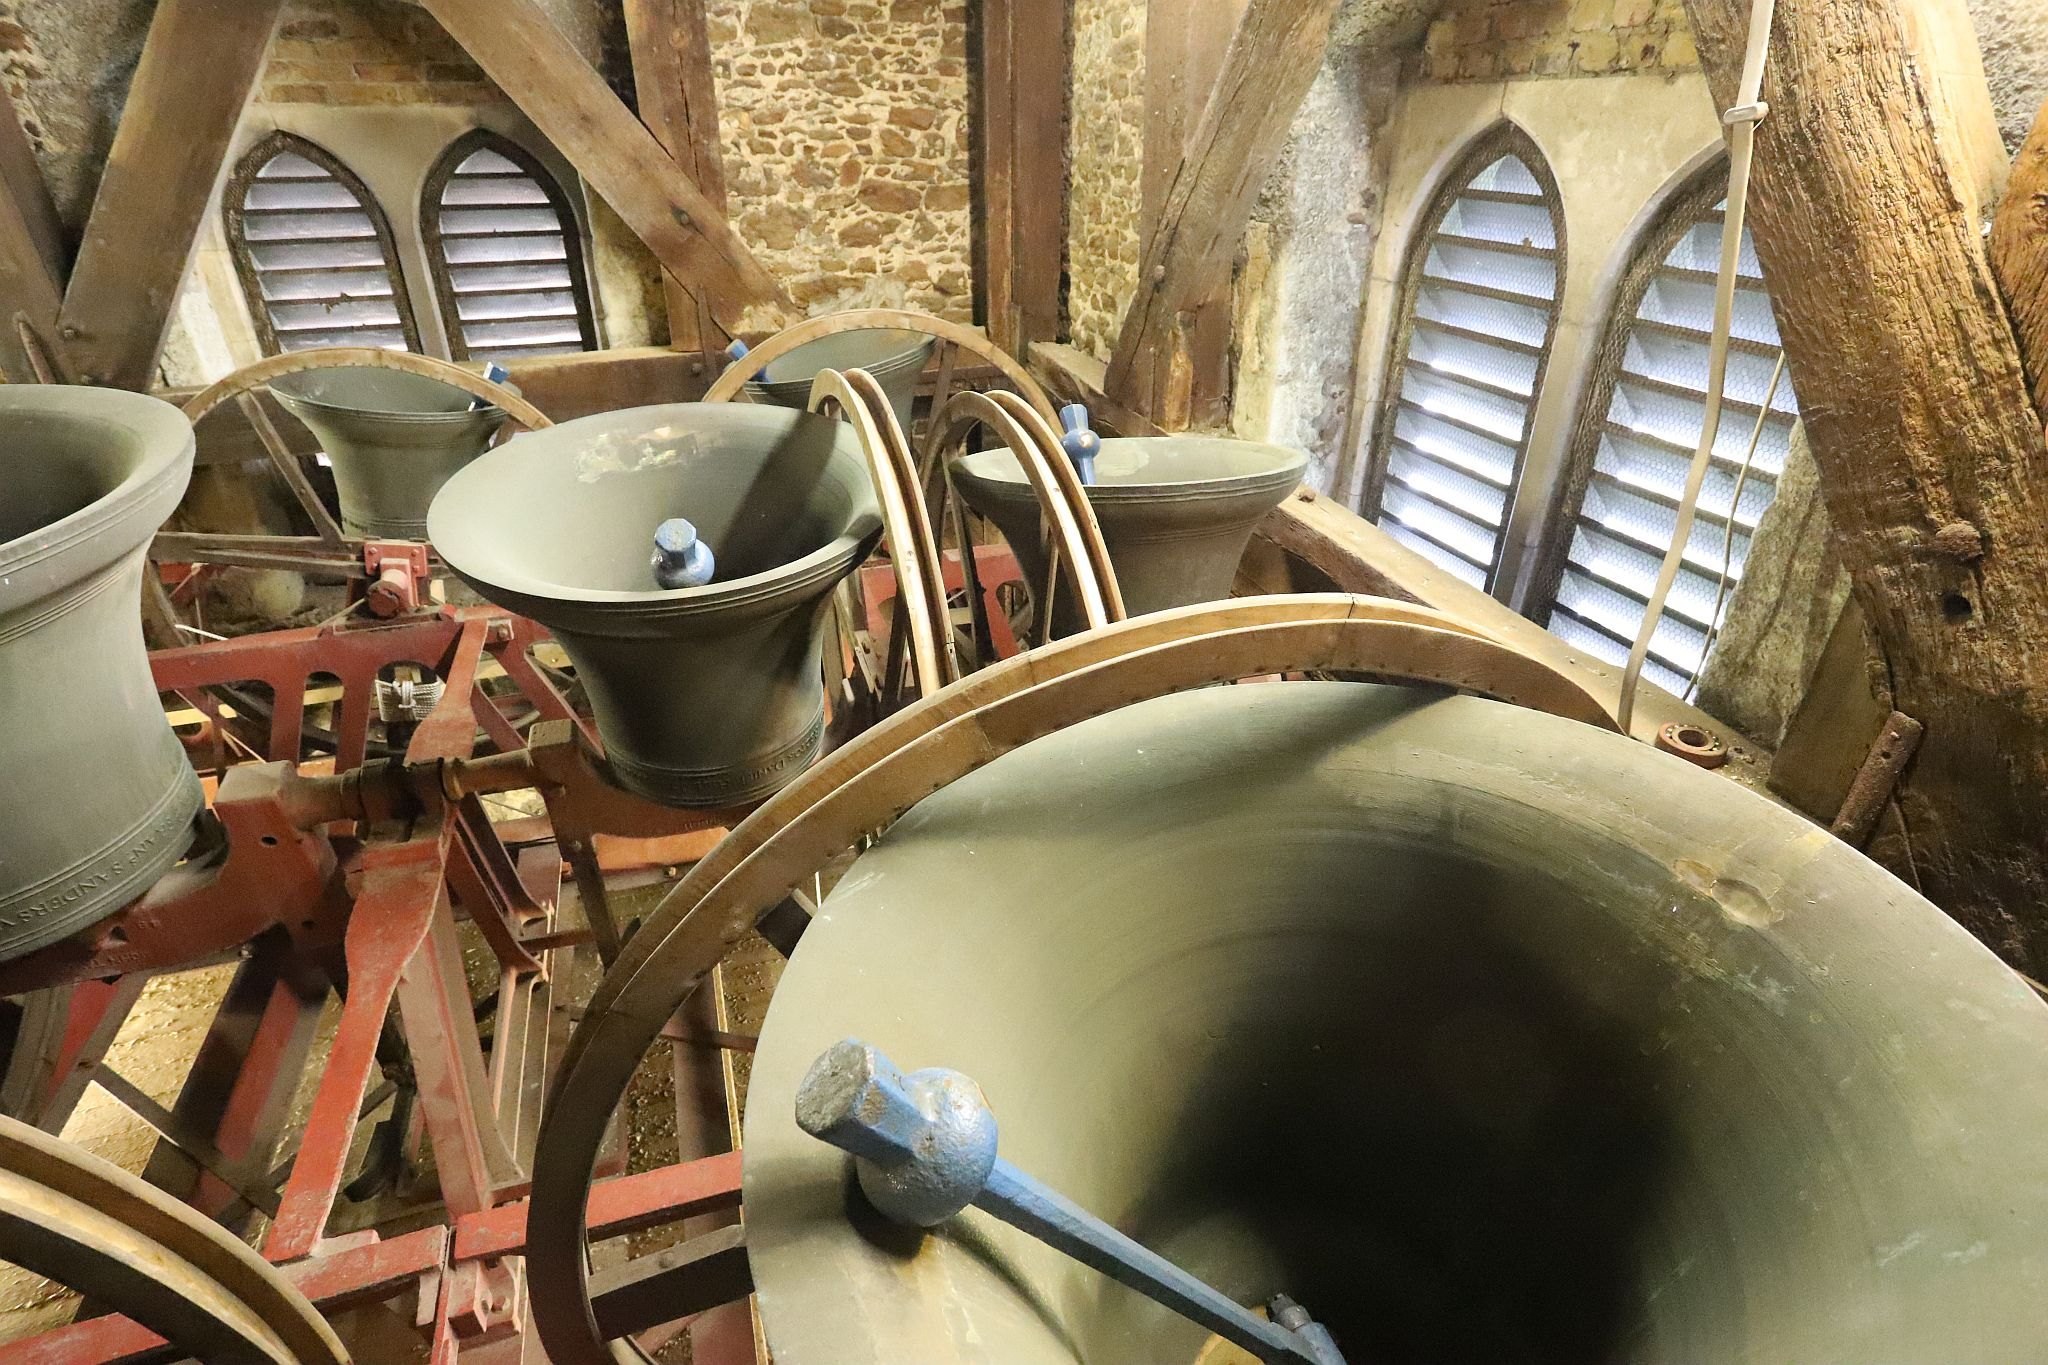 The church bells in the belfry. St Mary’s Church, Harrow-on-the-Hill, London. 29-Apr-2023.